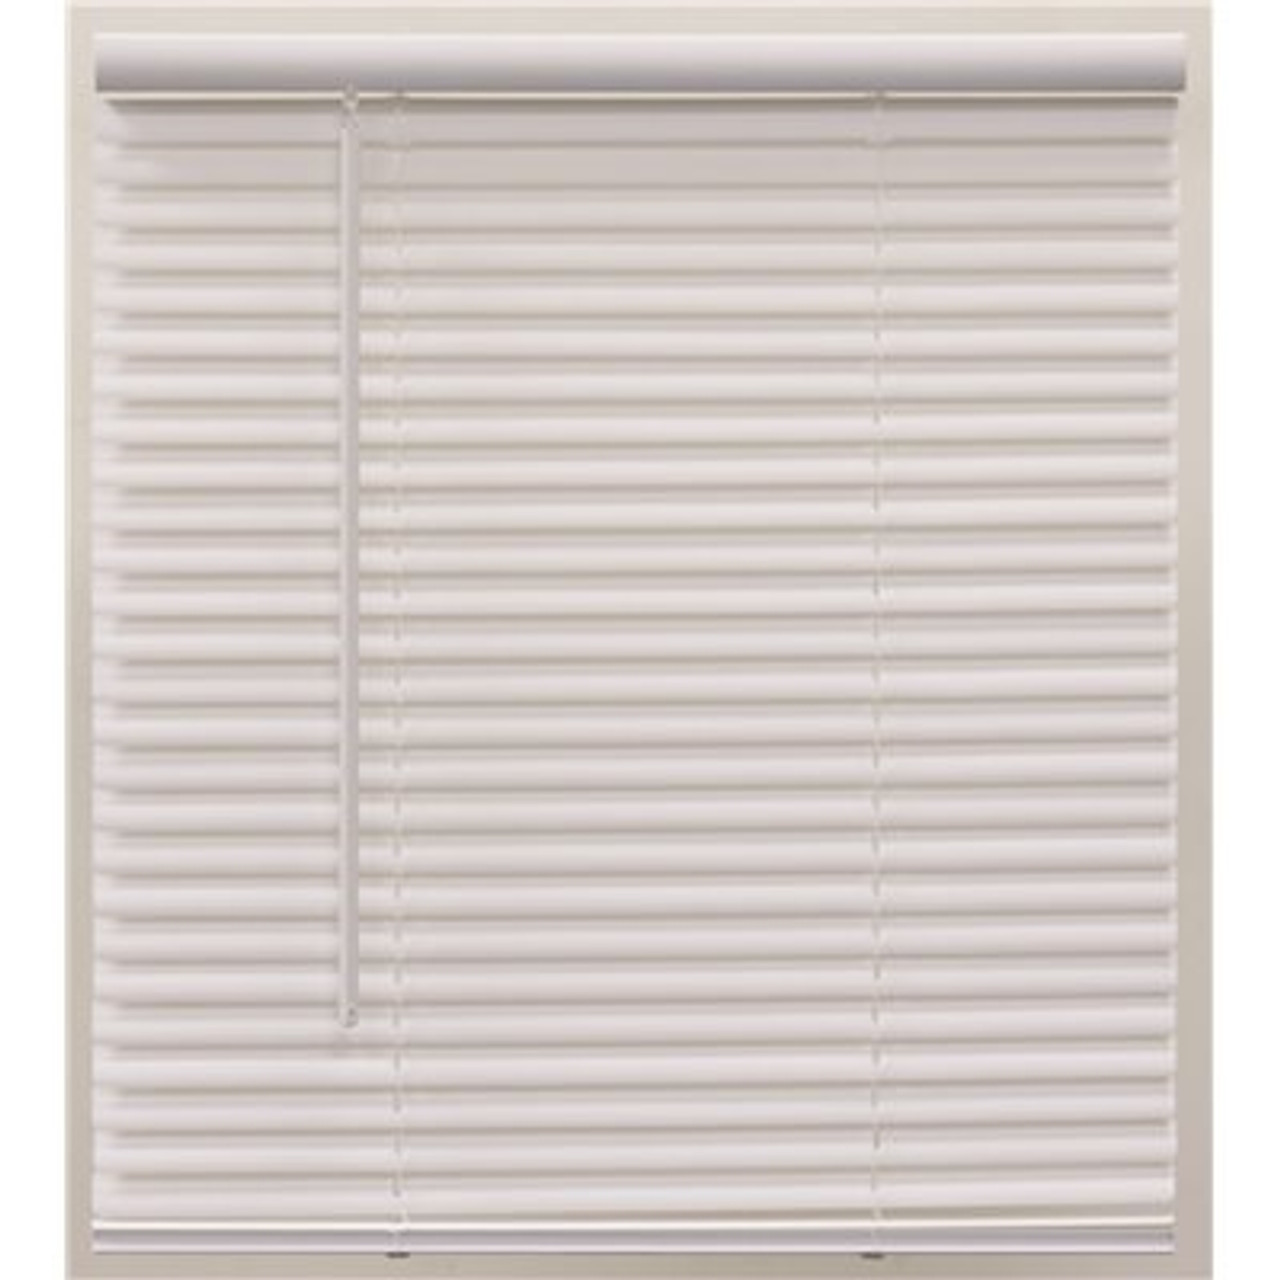 Champion Pre-Cut 24 in. W x 64 in. L Alabaster Cordless Light Filtering Vinyl Mini Blind with 1 in. Slats